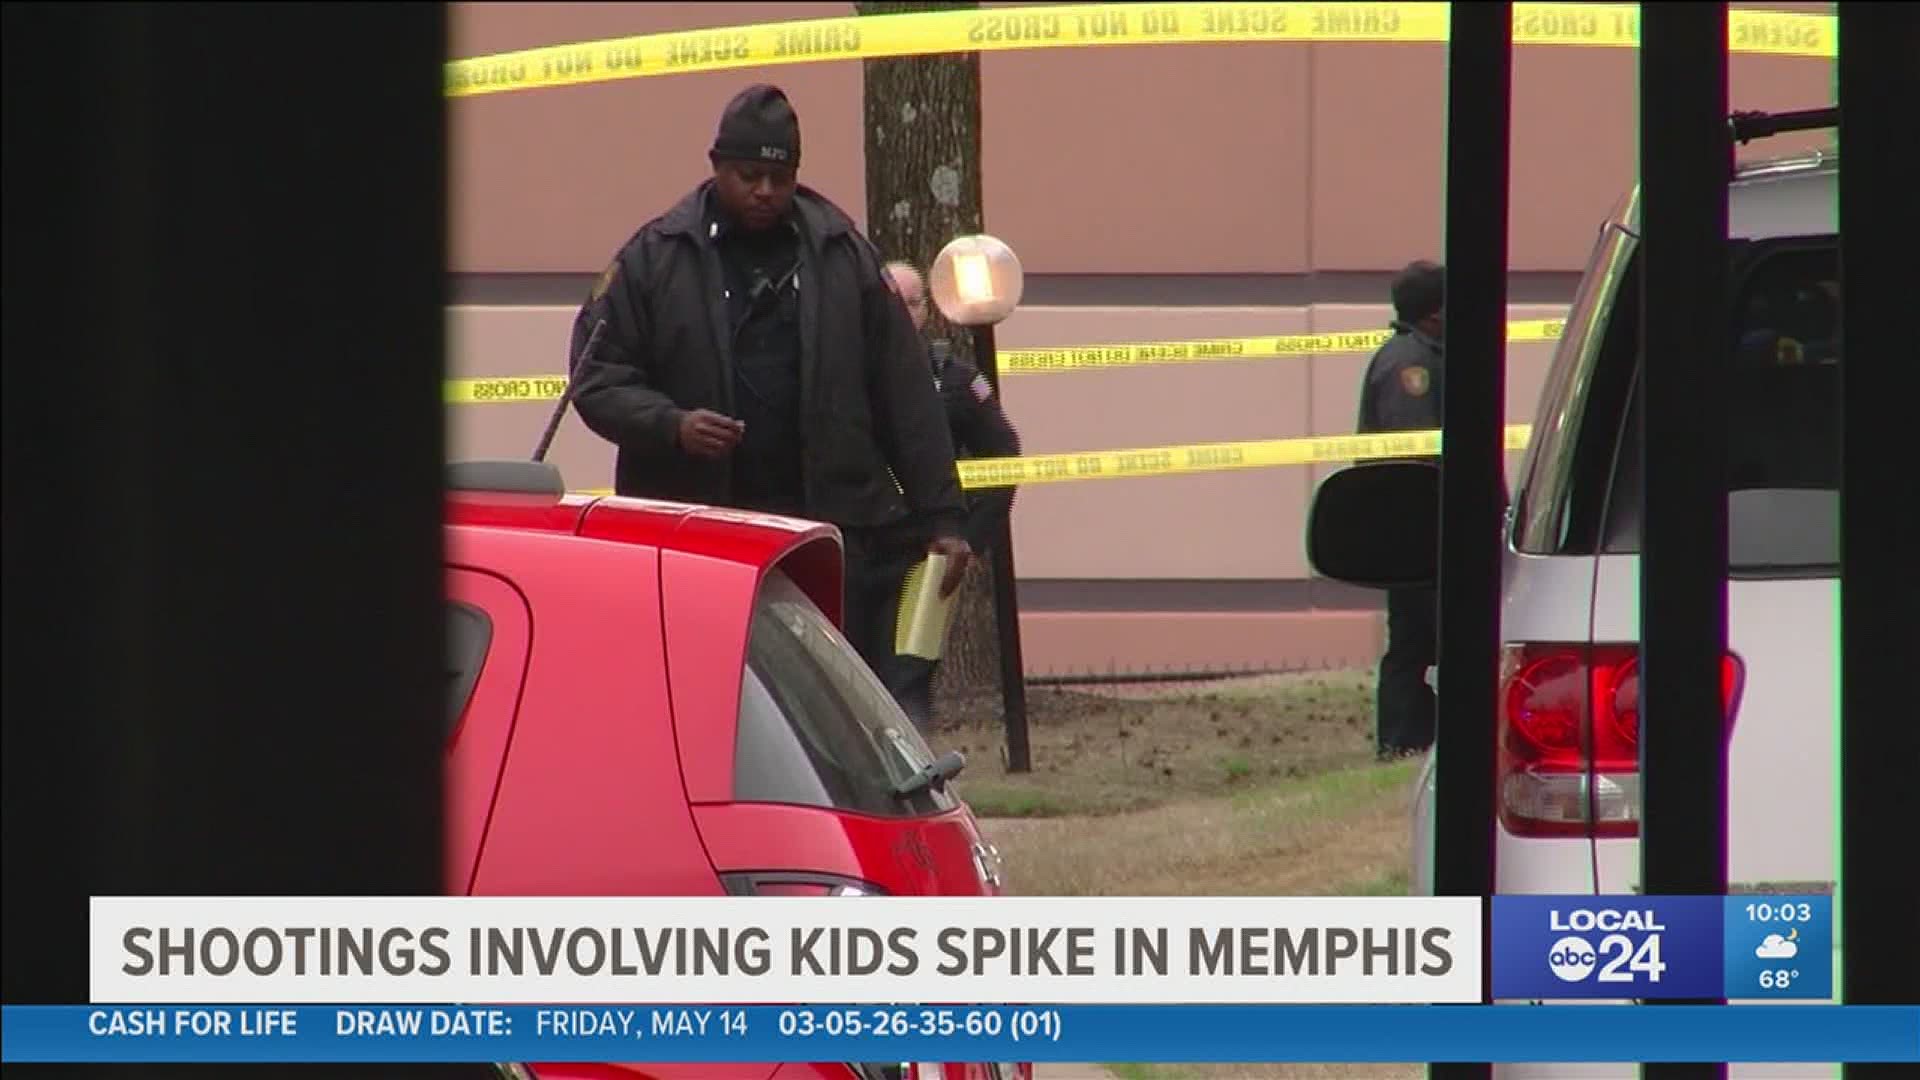 “Just sleeping at night, hearing gunshots for many children in the Memphis community is a difficult thing,” said Pastor Bill Adkins.